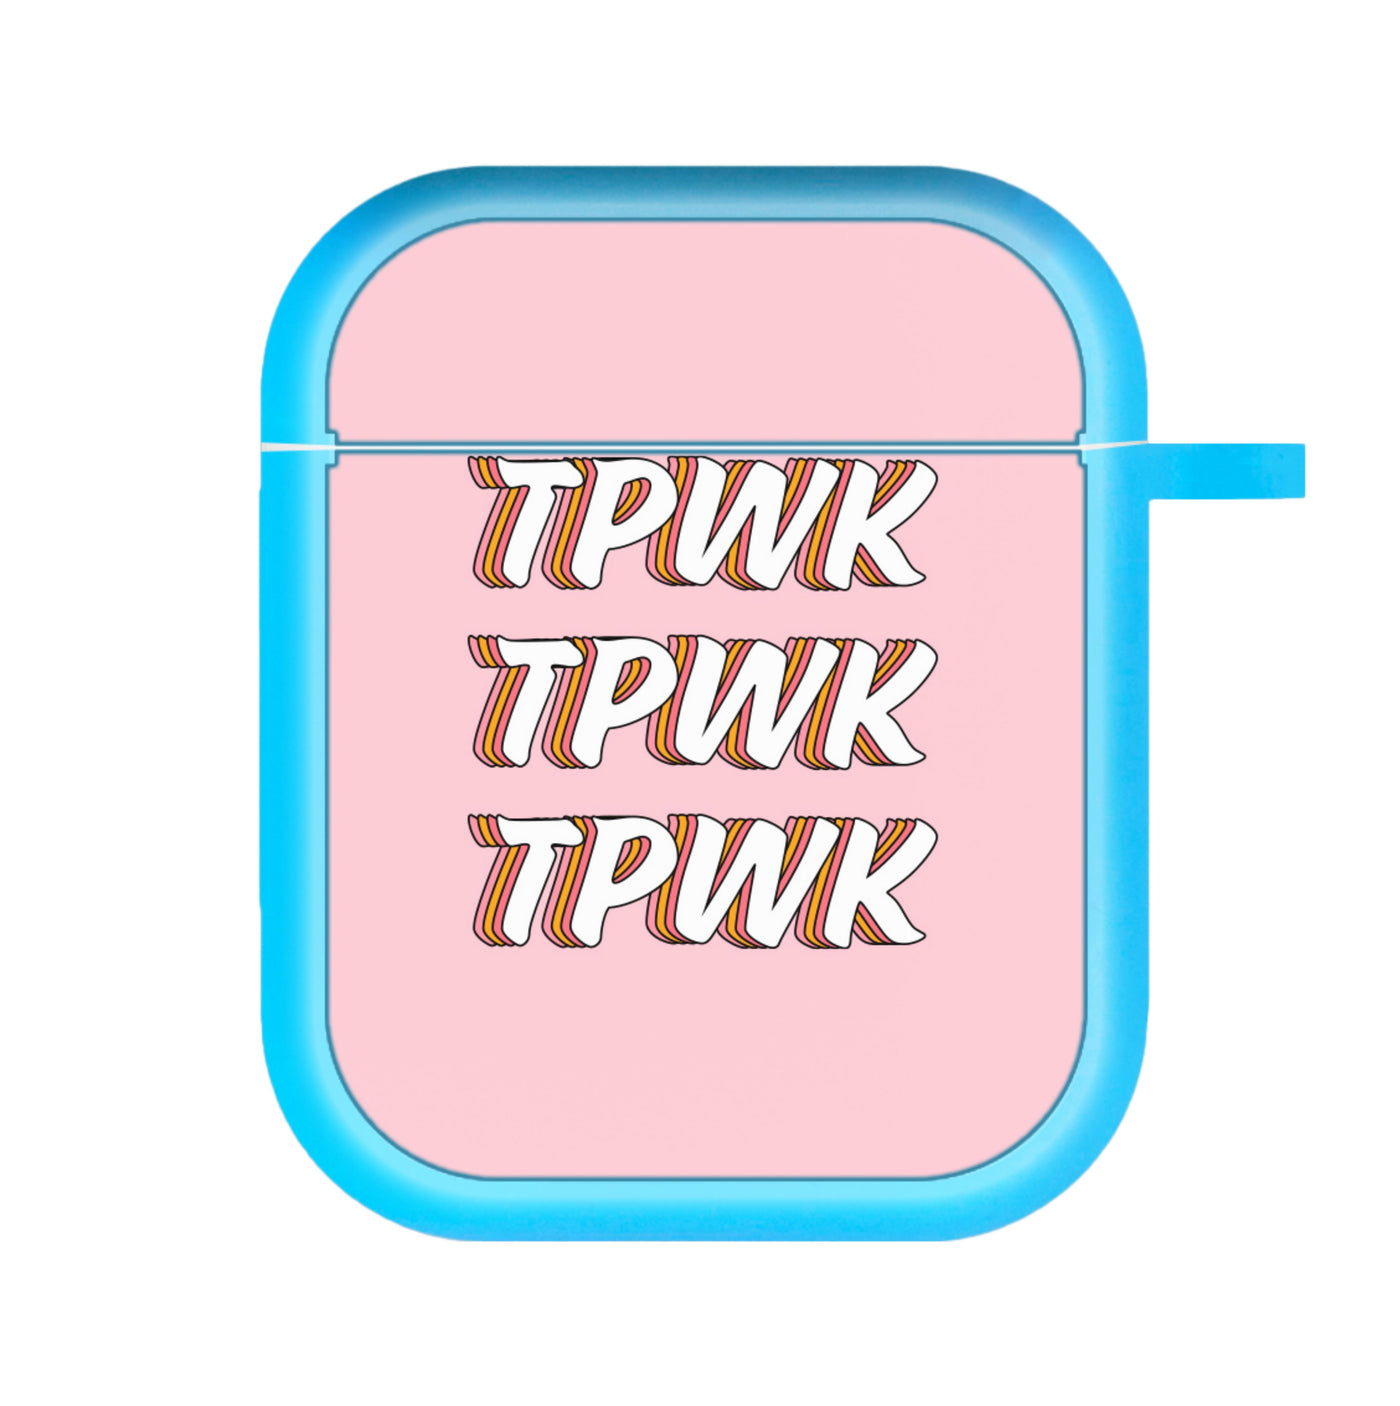 TPWK - Harry AirPods Case